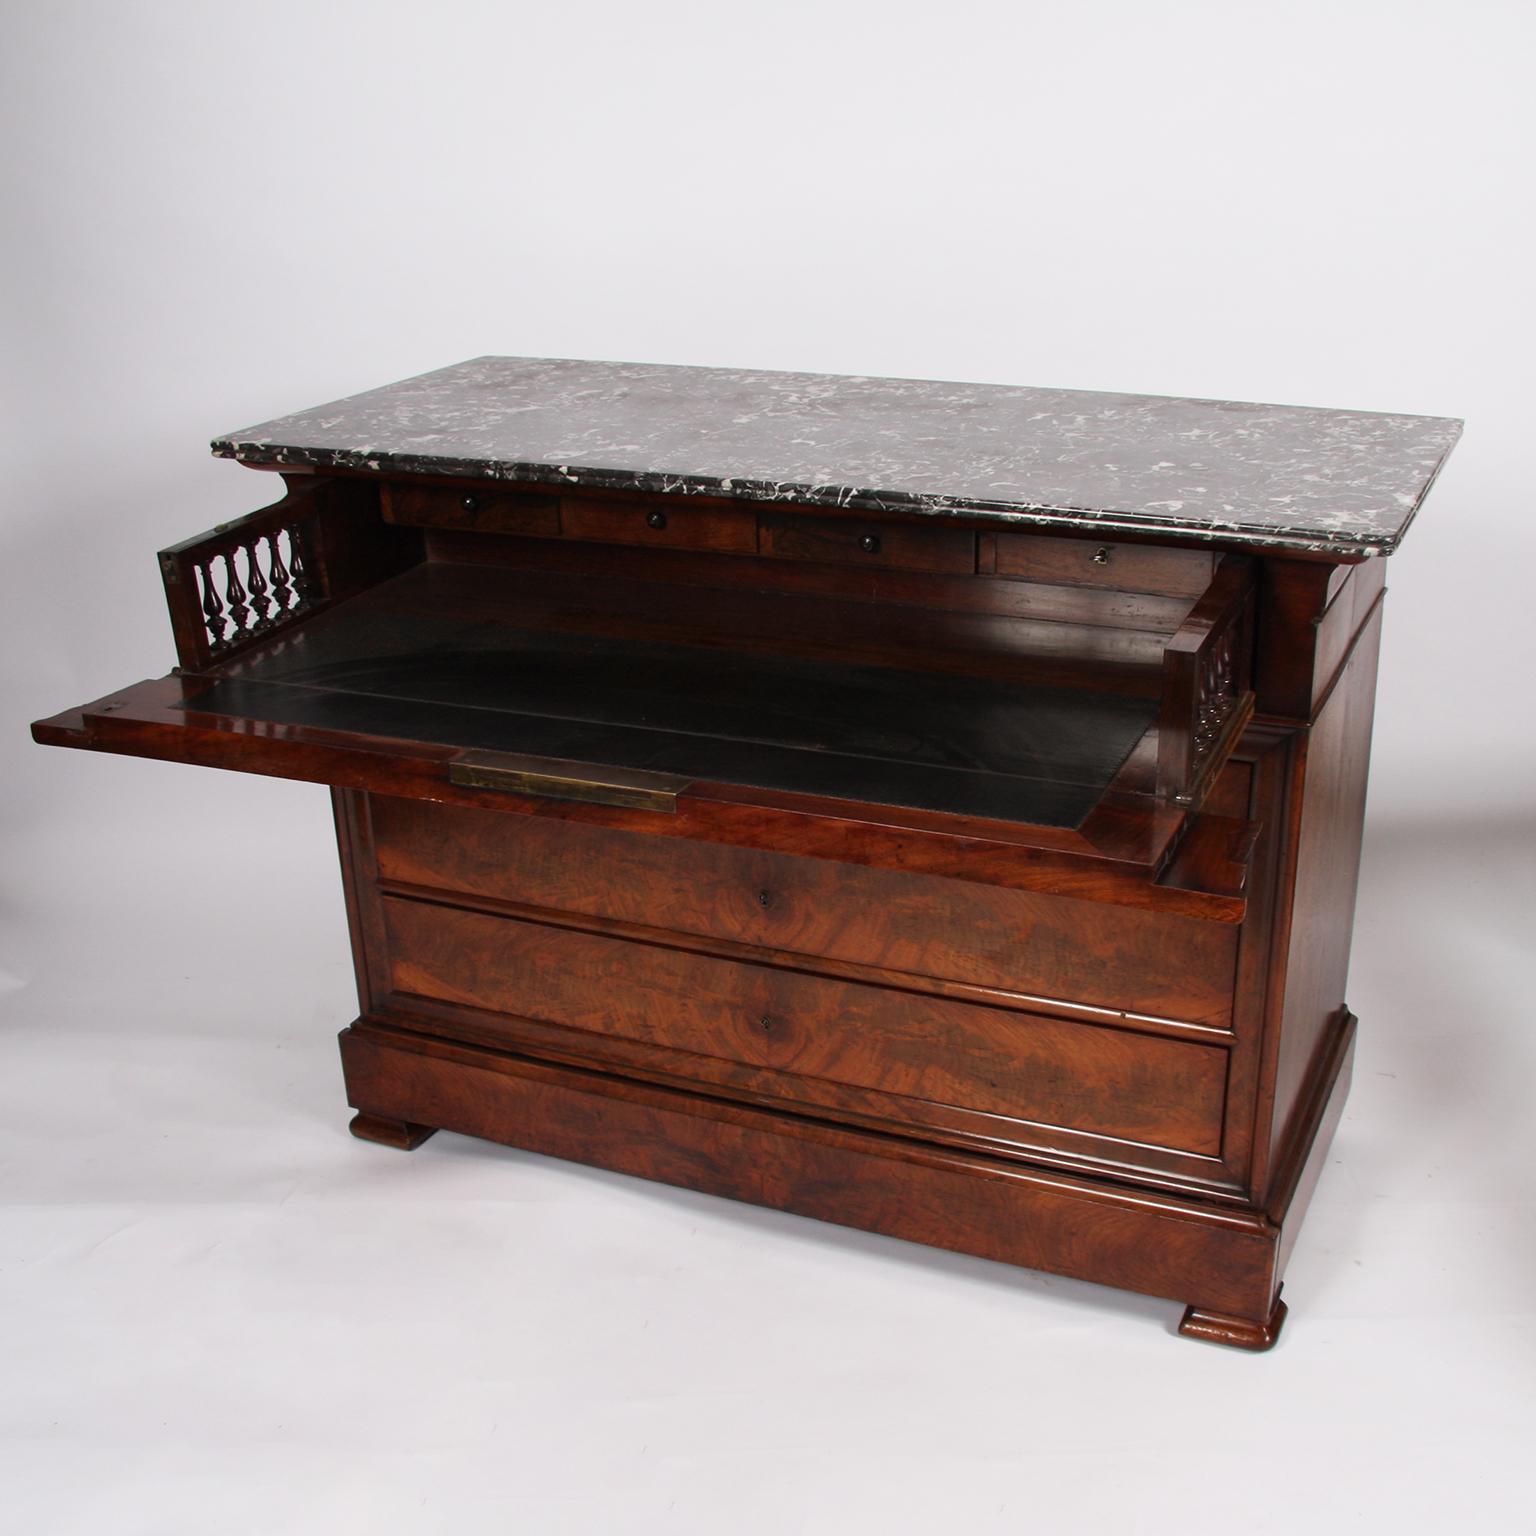 19th Century French Marble-Top Secretaire Chest with Leather Writing Surface 1